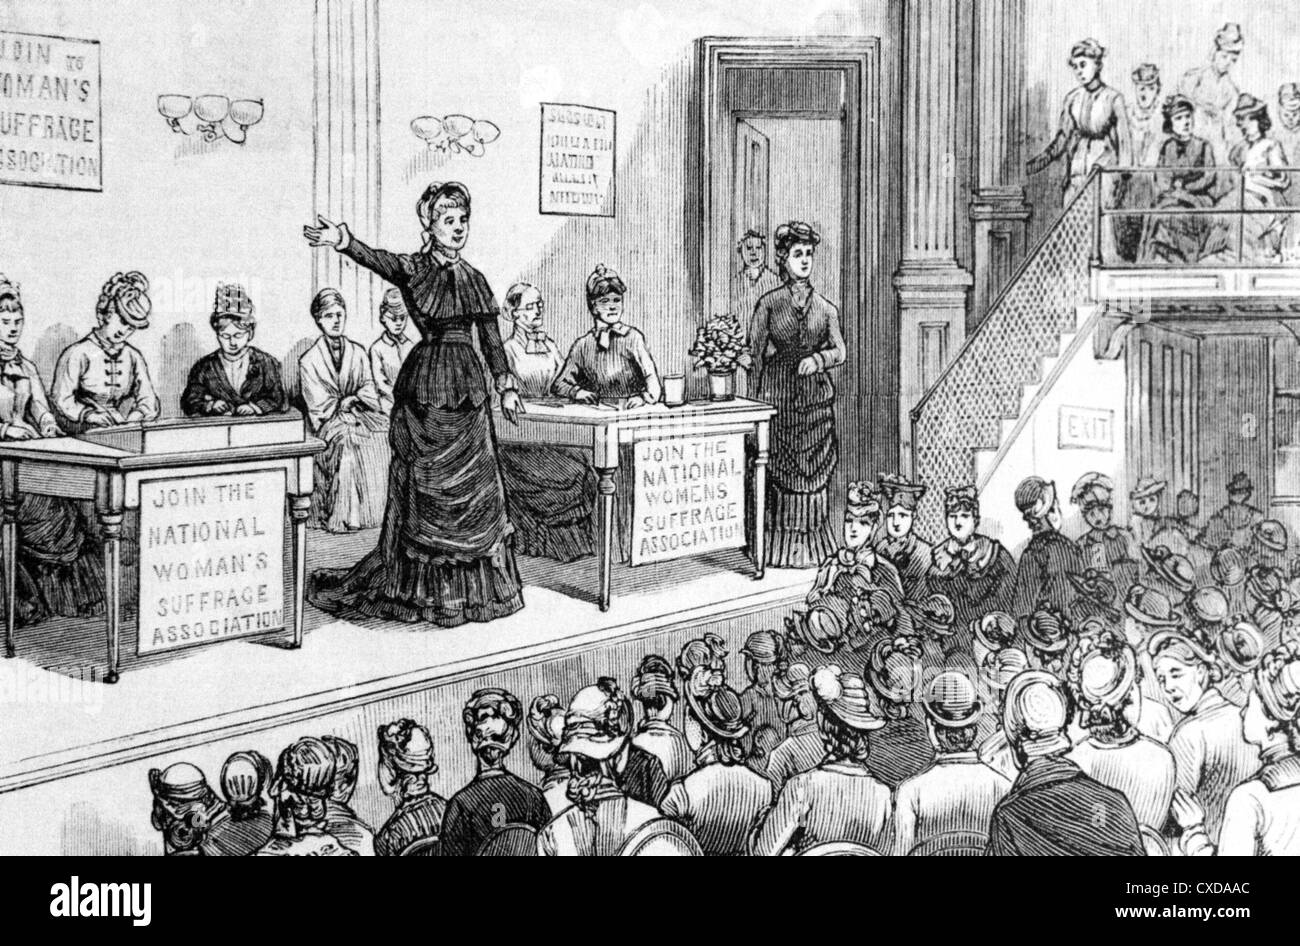 NATIONAL WOMENS' SUFFRAGE ASSOCIATION at a political convention in Stock Photo ...1300 x 945